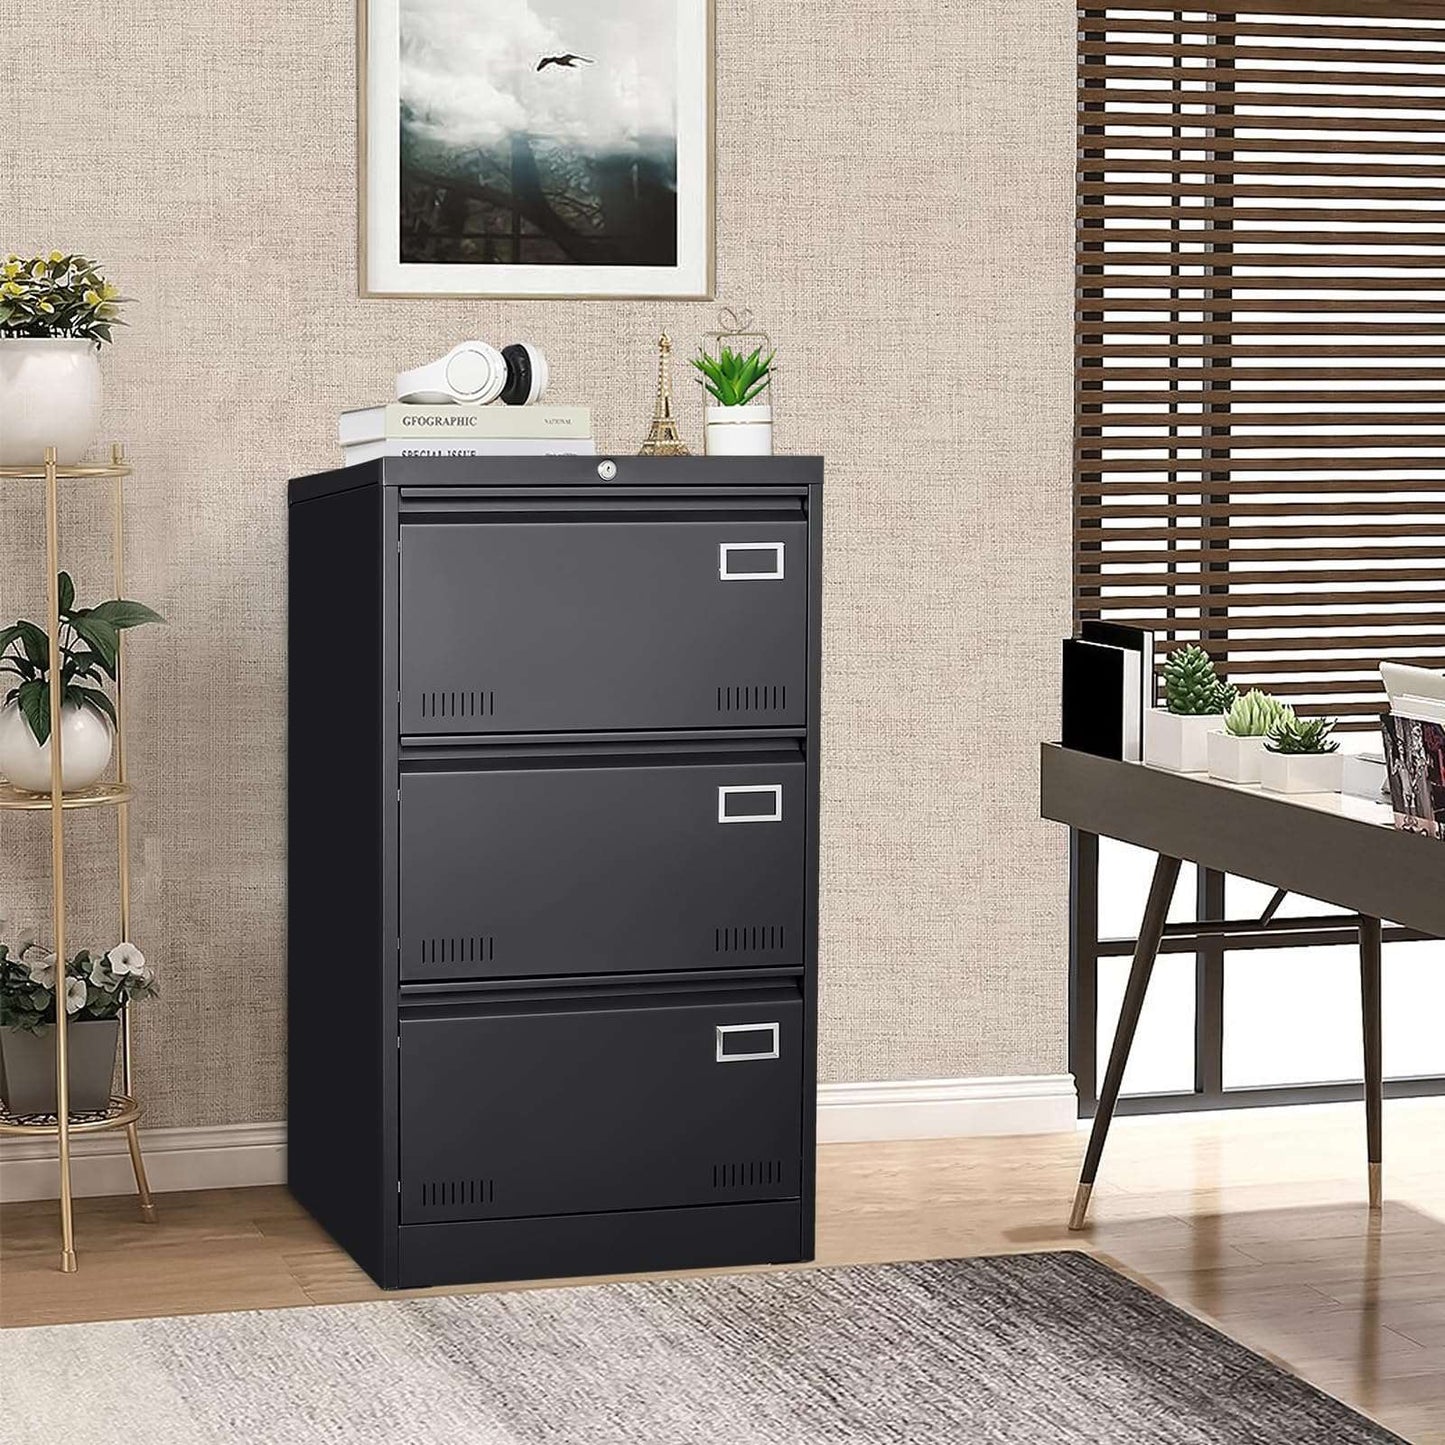 GREATMEET 2 Drawer Lateral File Cabinet,Metal Filing Cabinet with Lock,Locking Storage File Cabinet for Hanging Files,Office Lateral File Cabinets for Letter/Legal/F4/A4 Size,Black-2Drawer